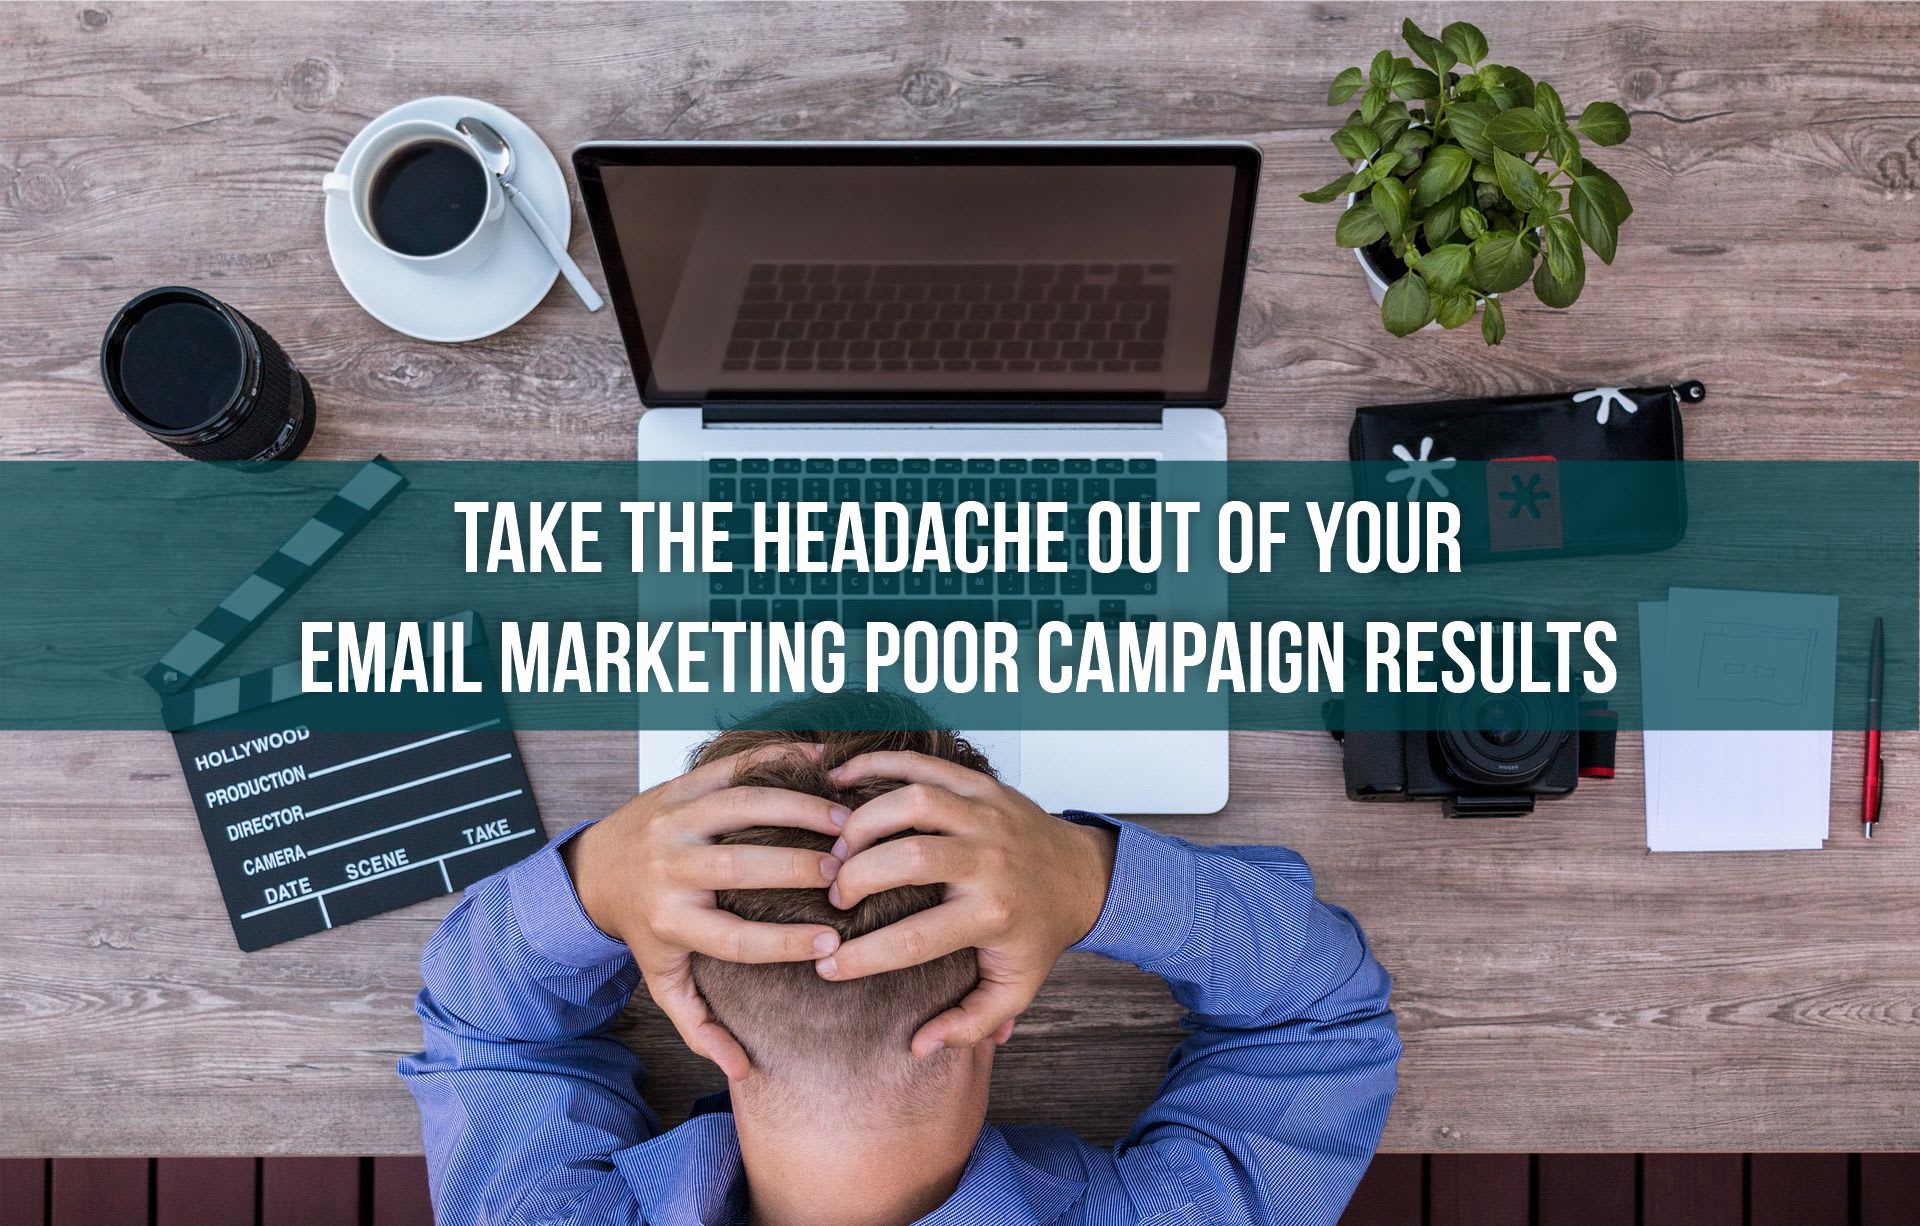 Taking the Headache Out of Your Email Marketing